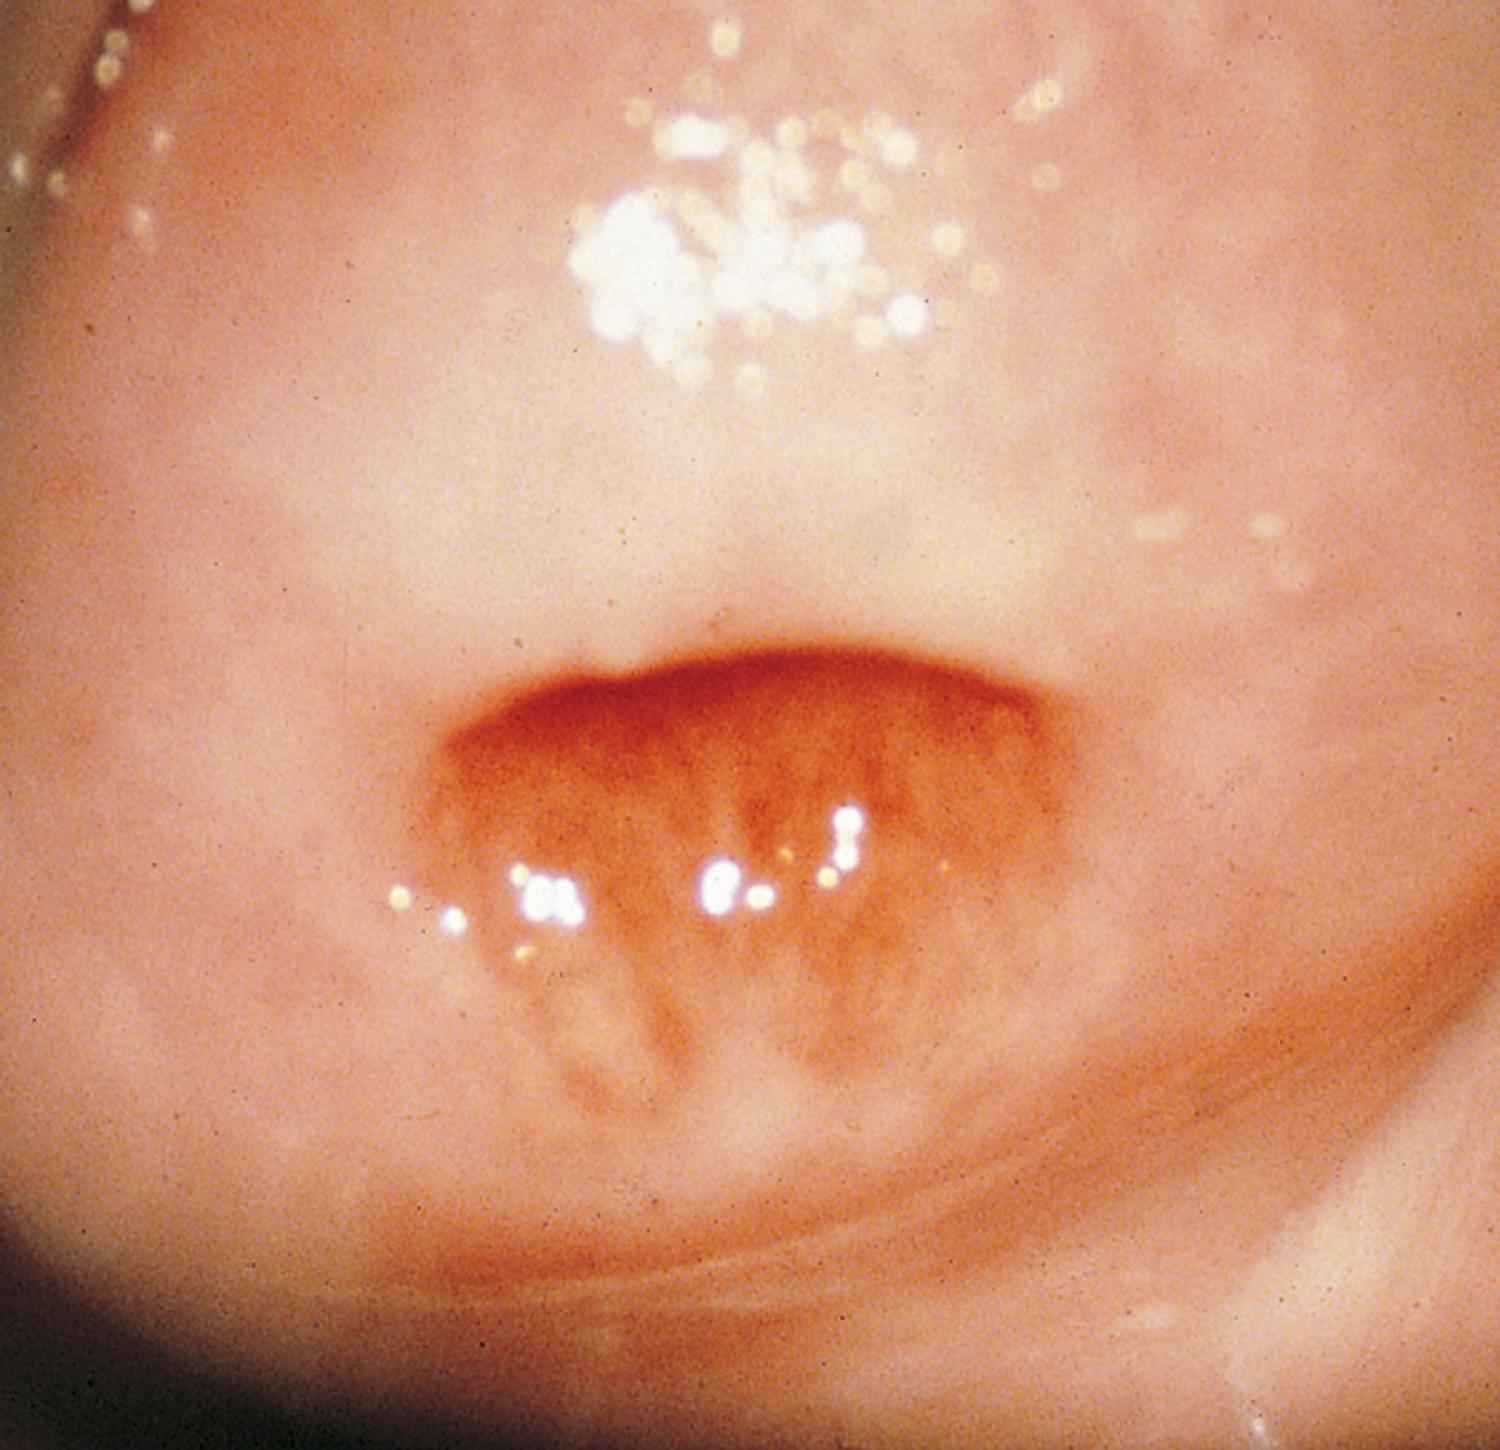 Fig. 19.8, Normal nulliparous cervix. The surface is covered with pink squamous epithelium that is uniform in consistency. The os is small and round. A small area of ectropion is visible inferior to the os.